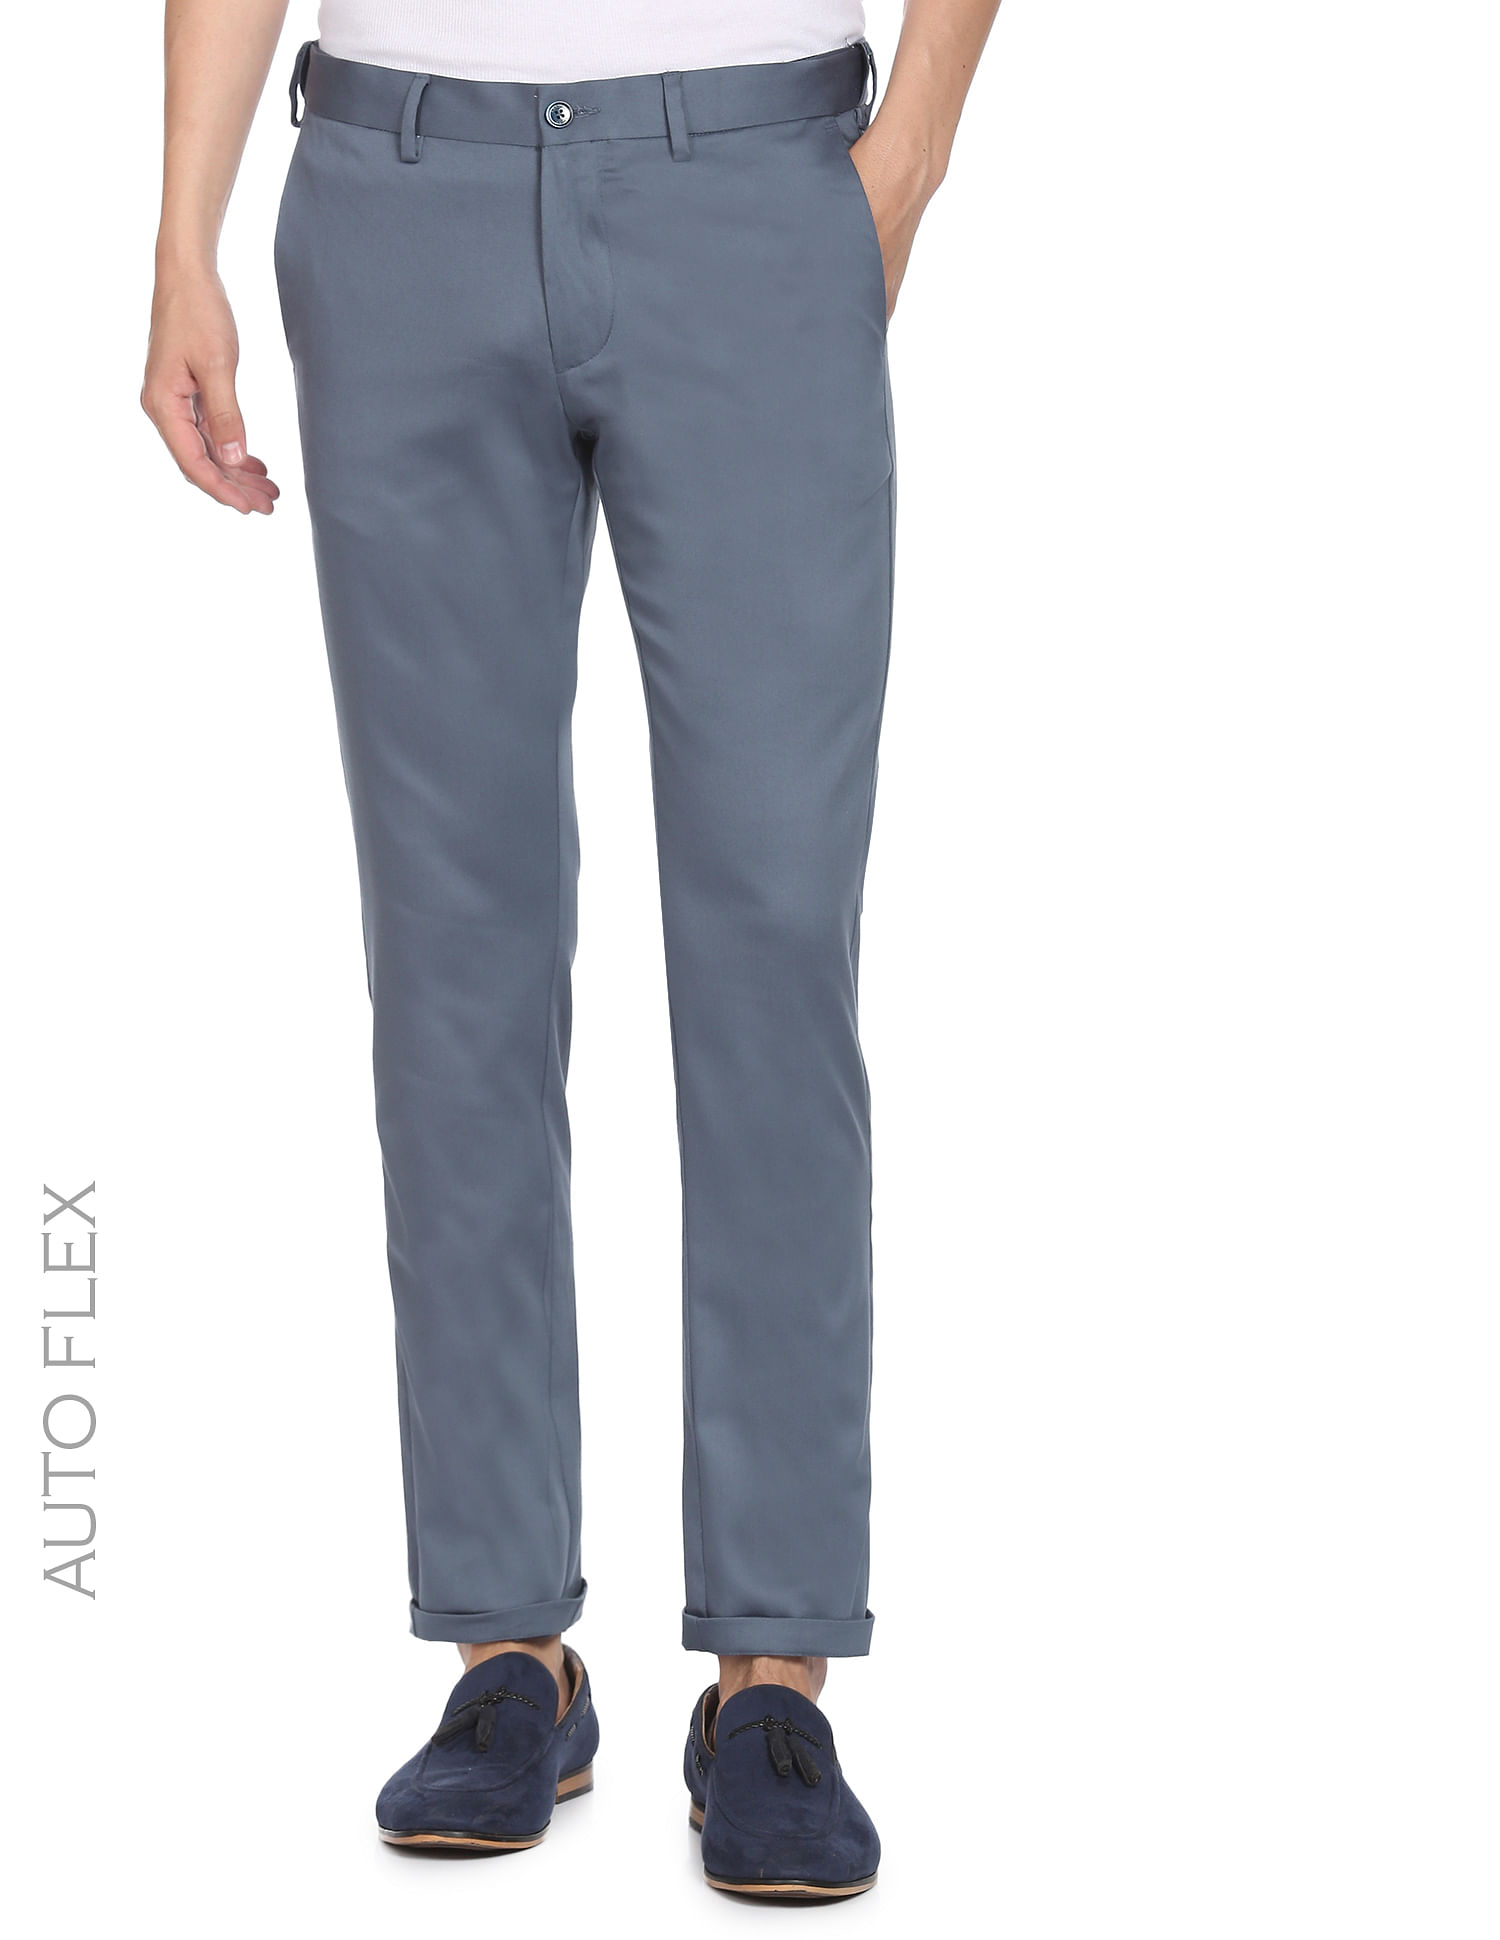 Buy Arrow Flat Front Solid Formal Trousers - NNNOW.com